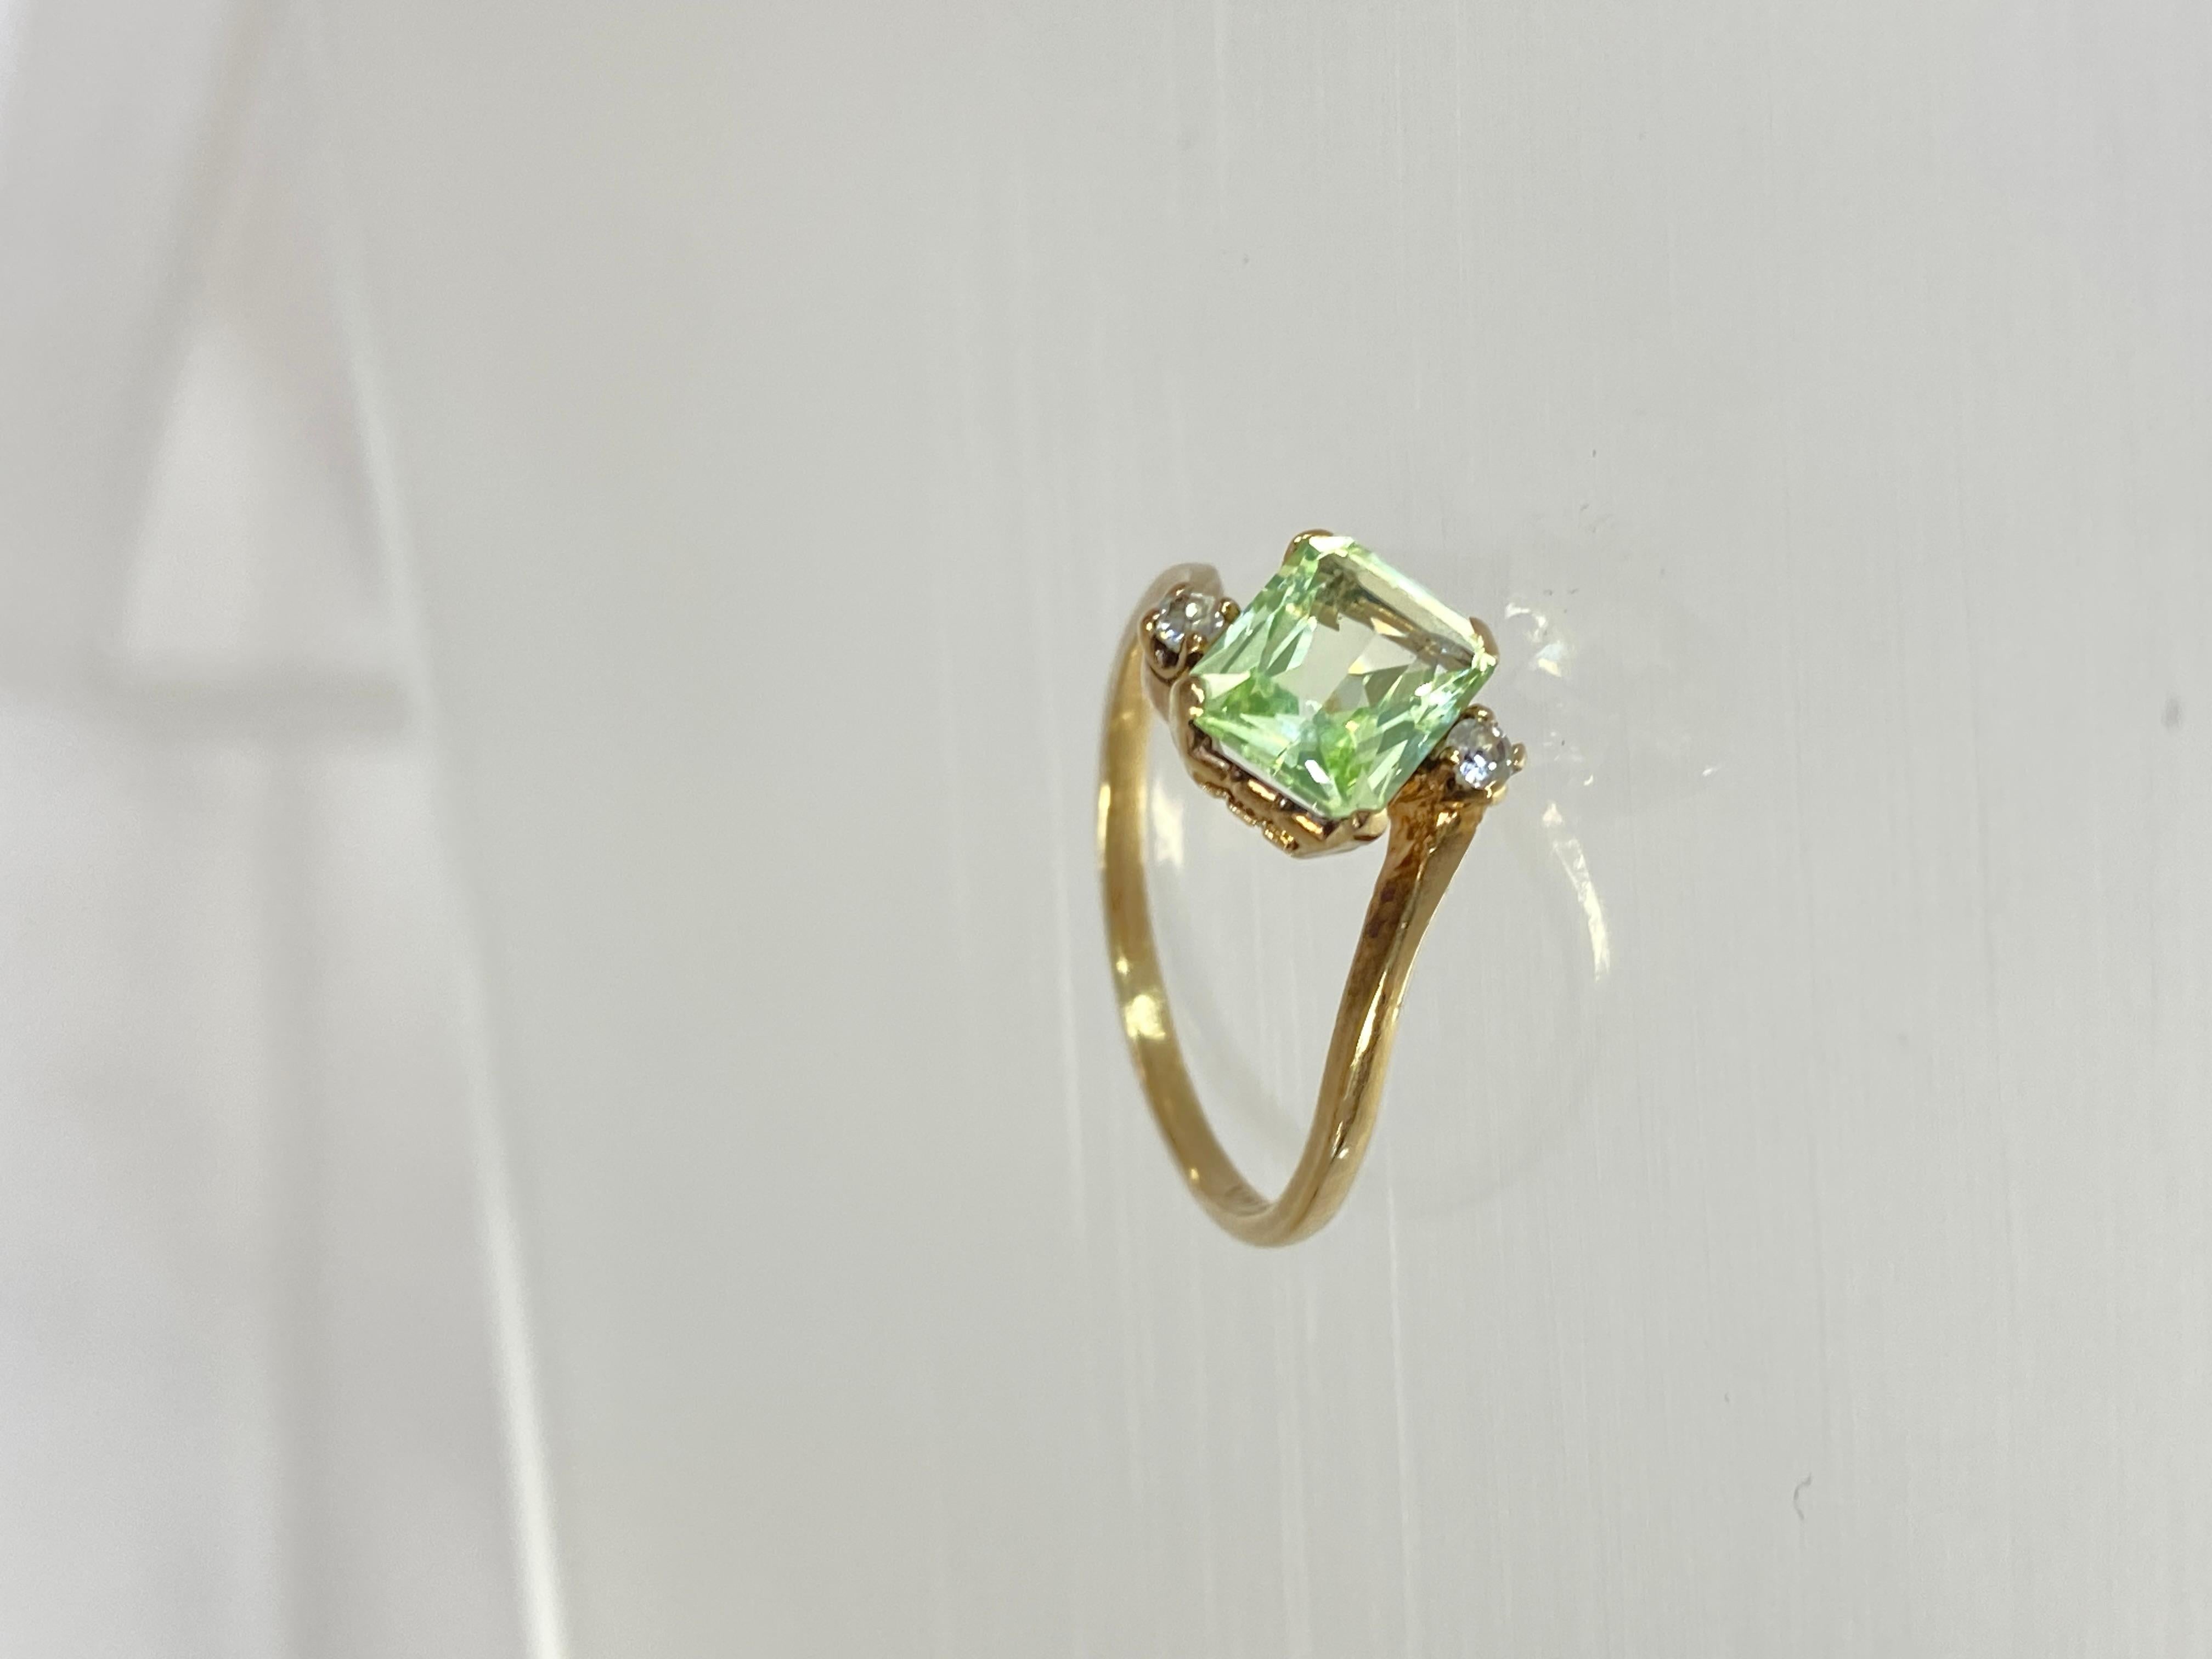 10K Yellow Gold Old Fashioned Emerald Cut Green Beryl Solitaire Ring Size 8.25 1